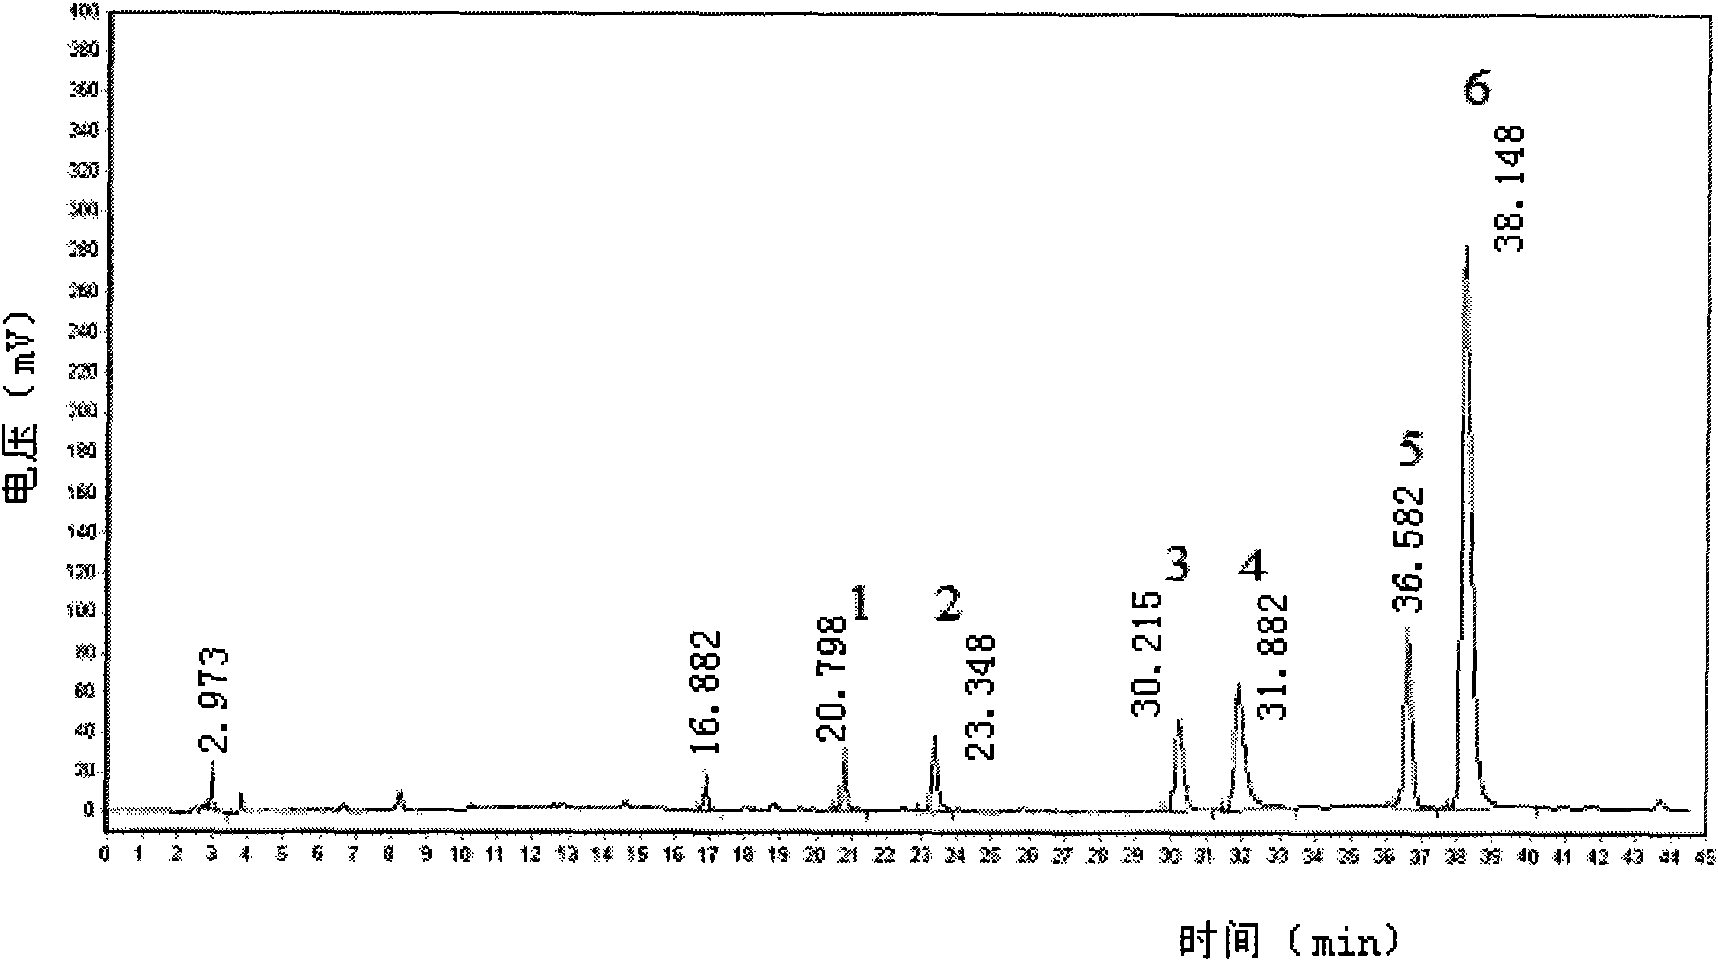 Wine-steamed Chinese goldthread processed product as well as preparation method and application thereof